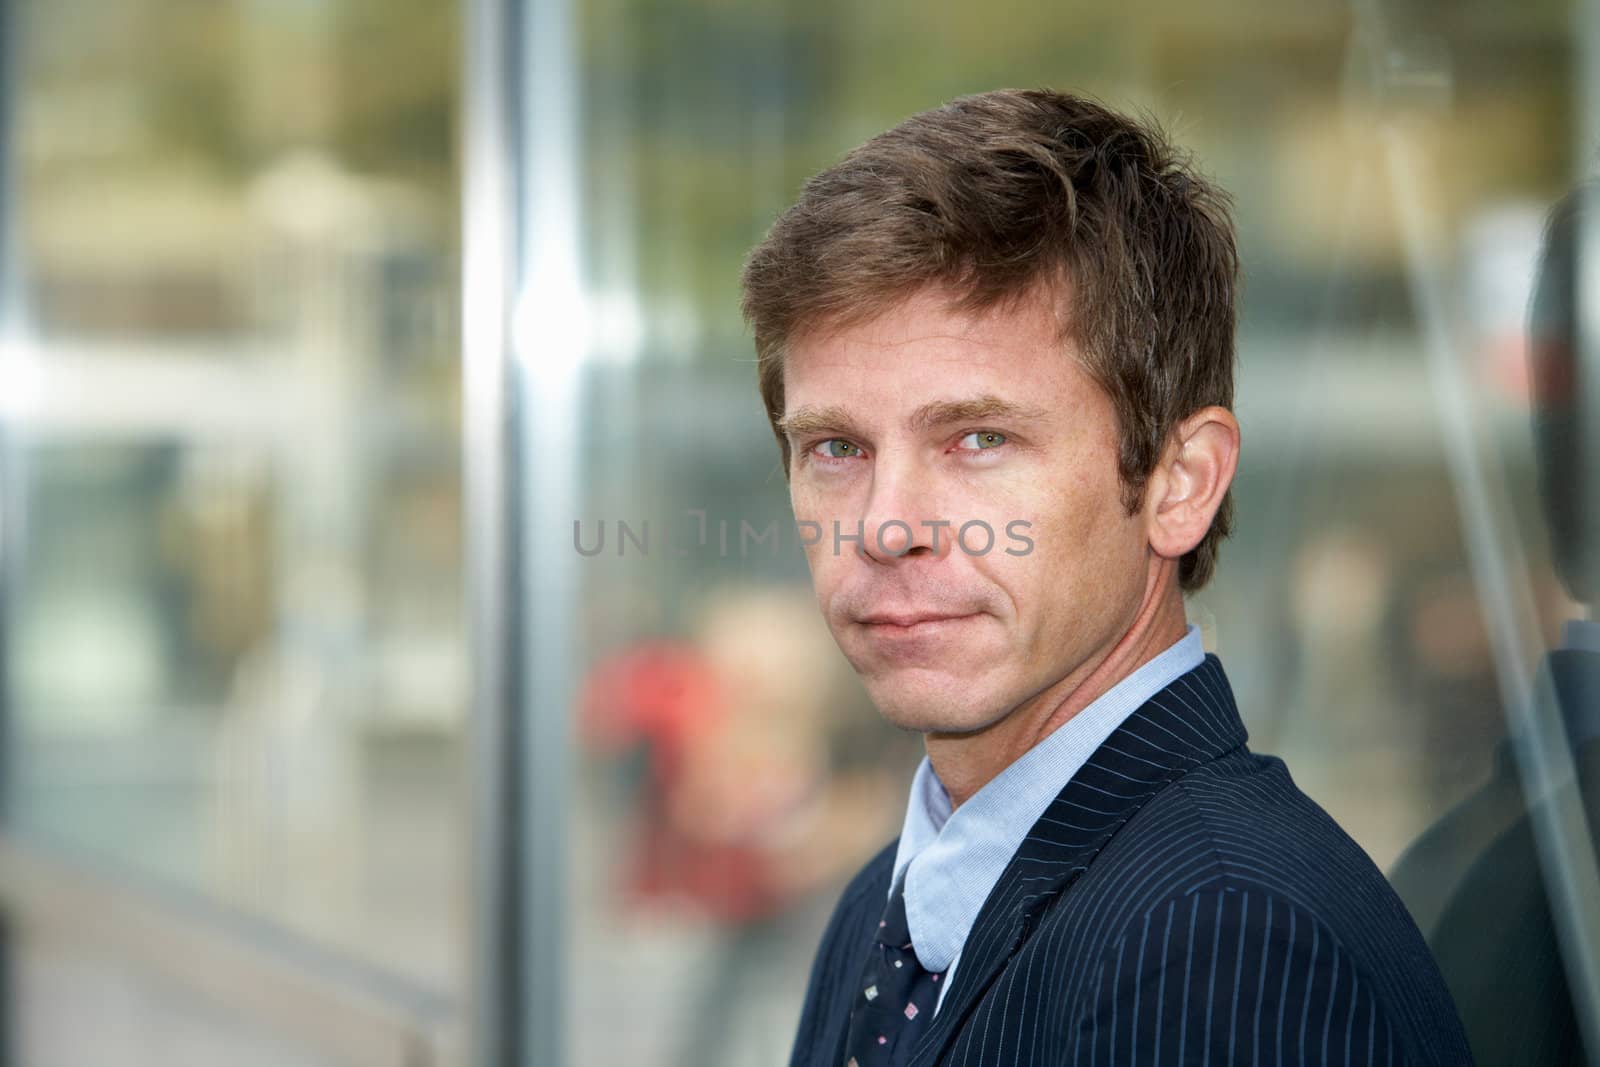 Man leaning against glass wall outdoors in city